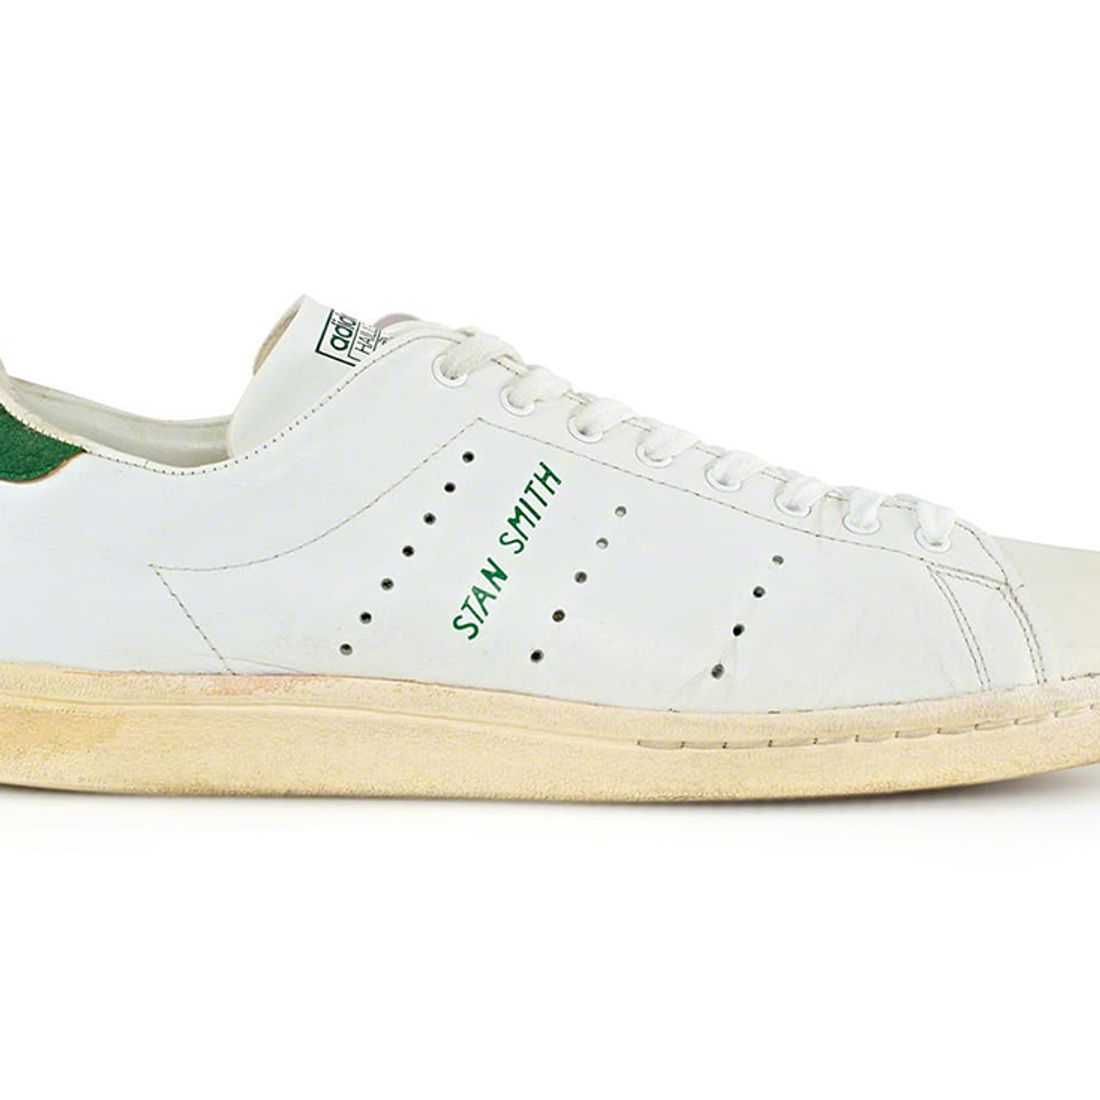 From Stan Smith to the Superstar, is the Home of Classics - Sneaker Freaker